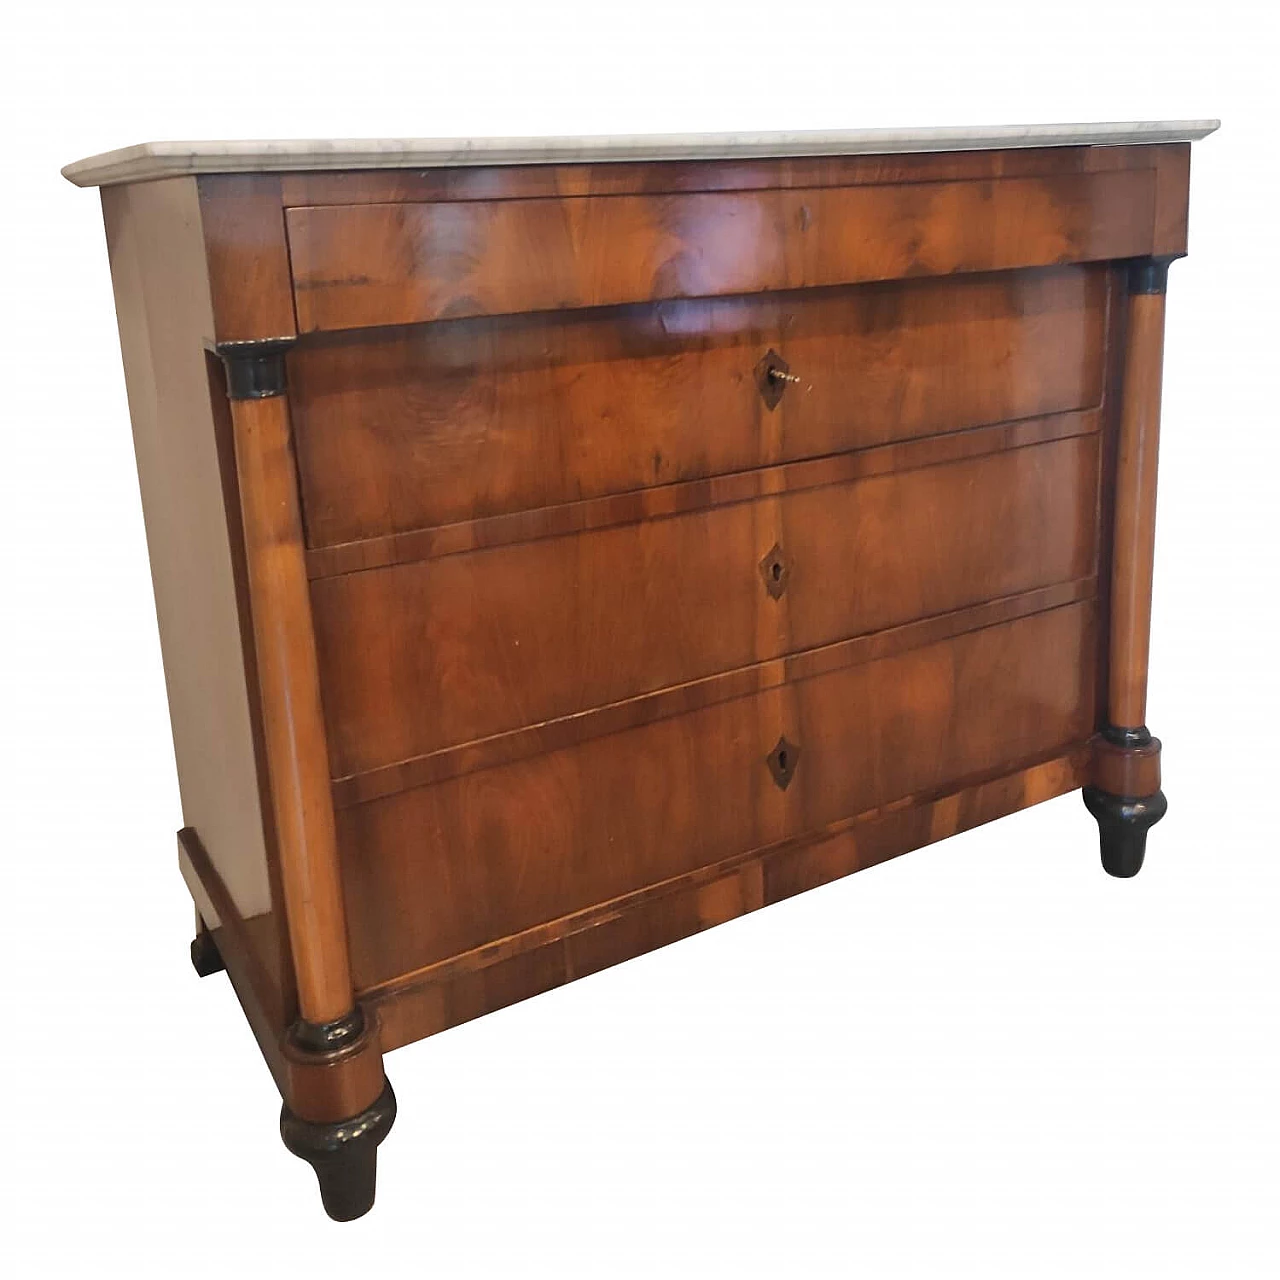 Empire chest of drawers in walnut with marble top, '800 1225989